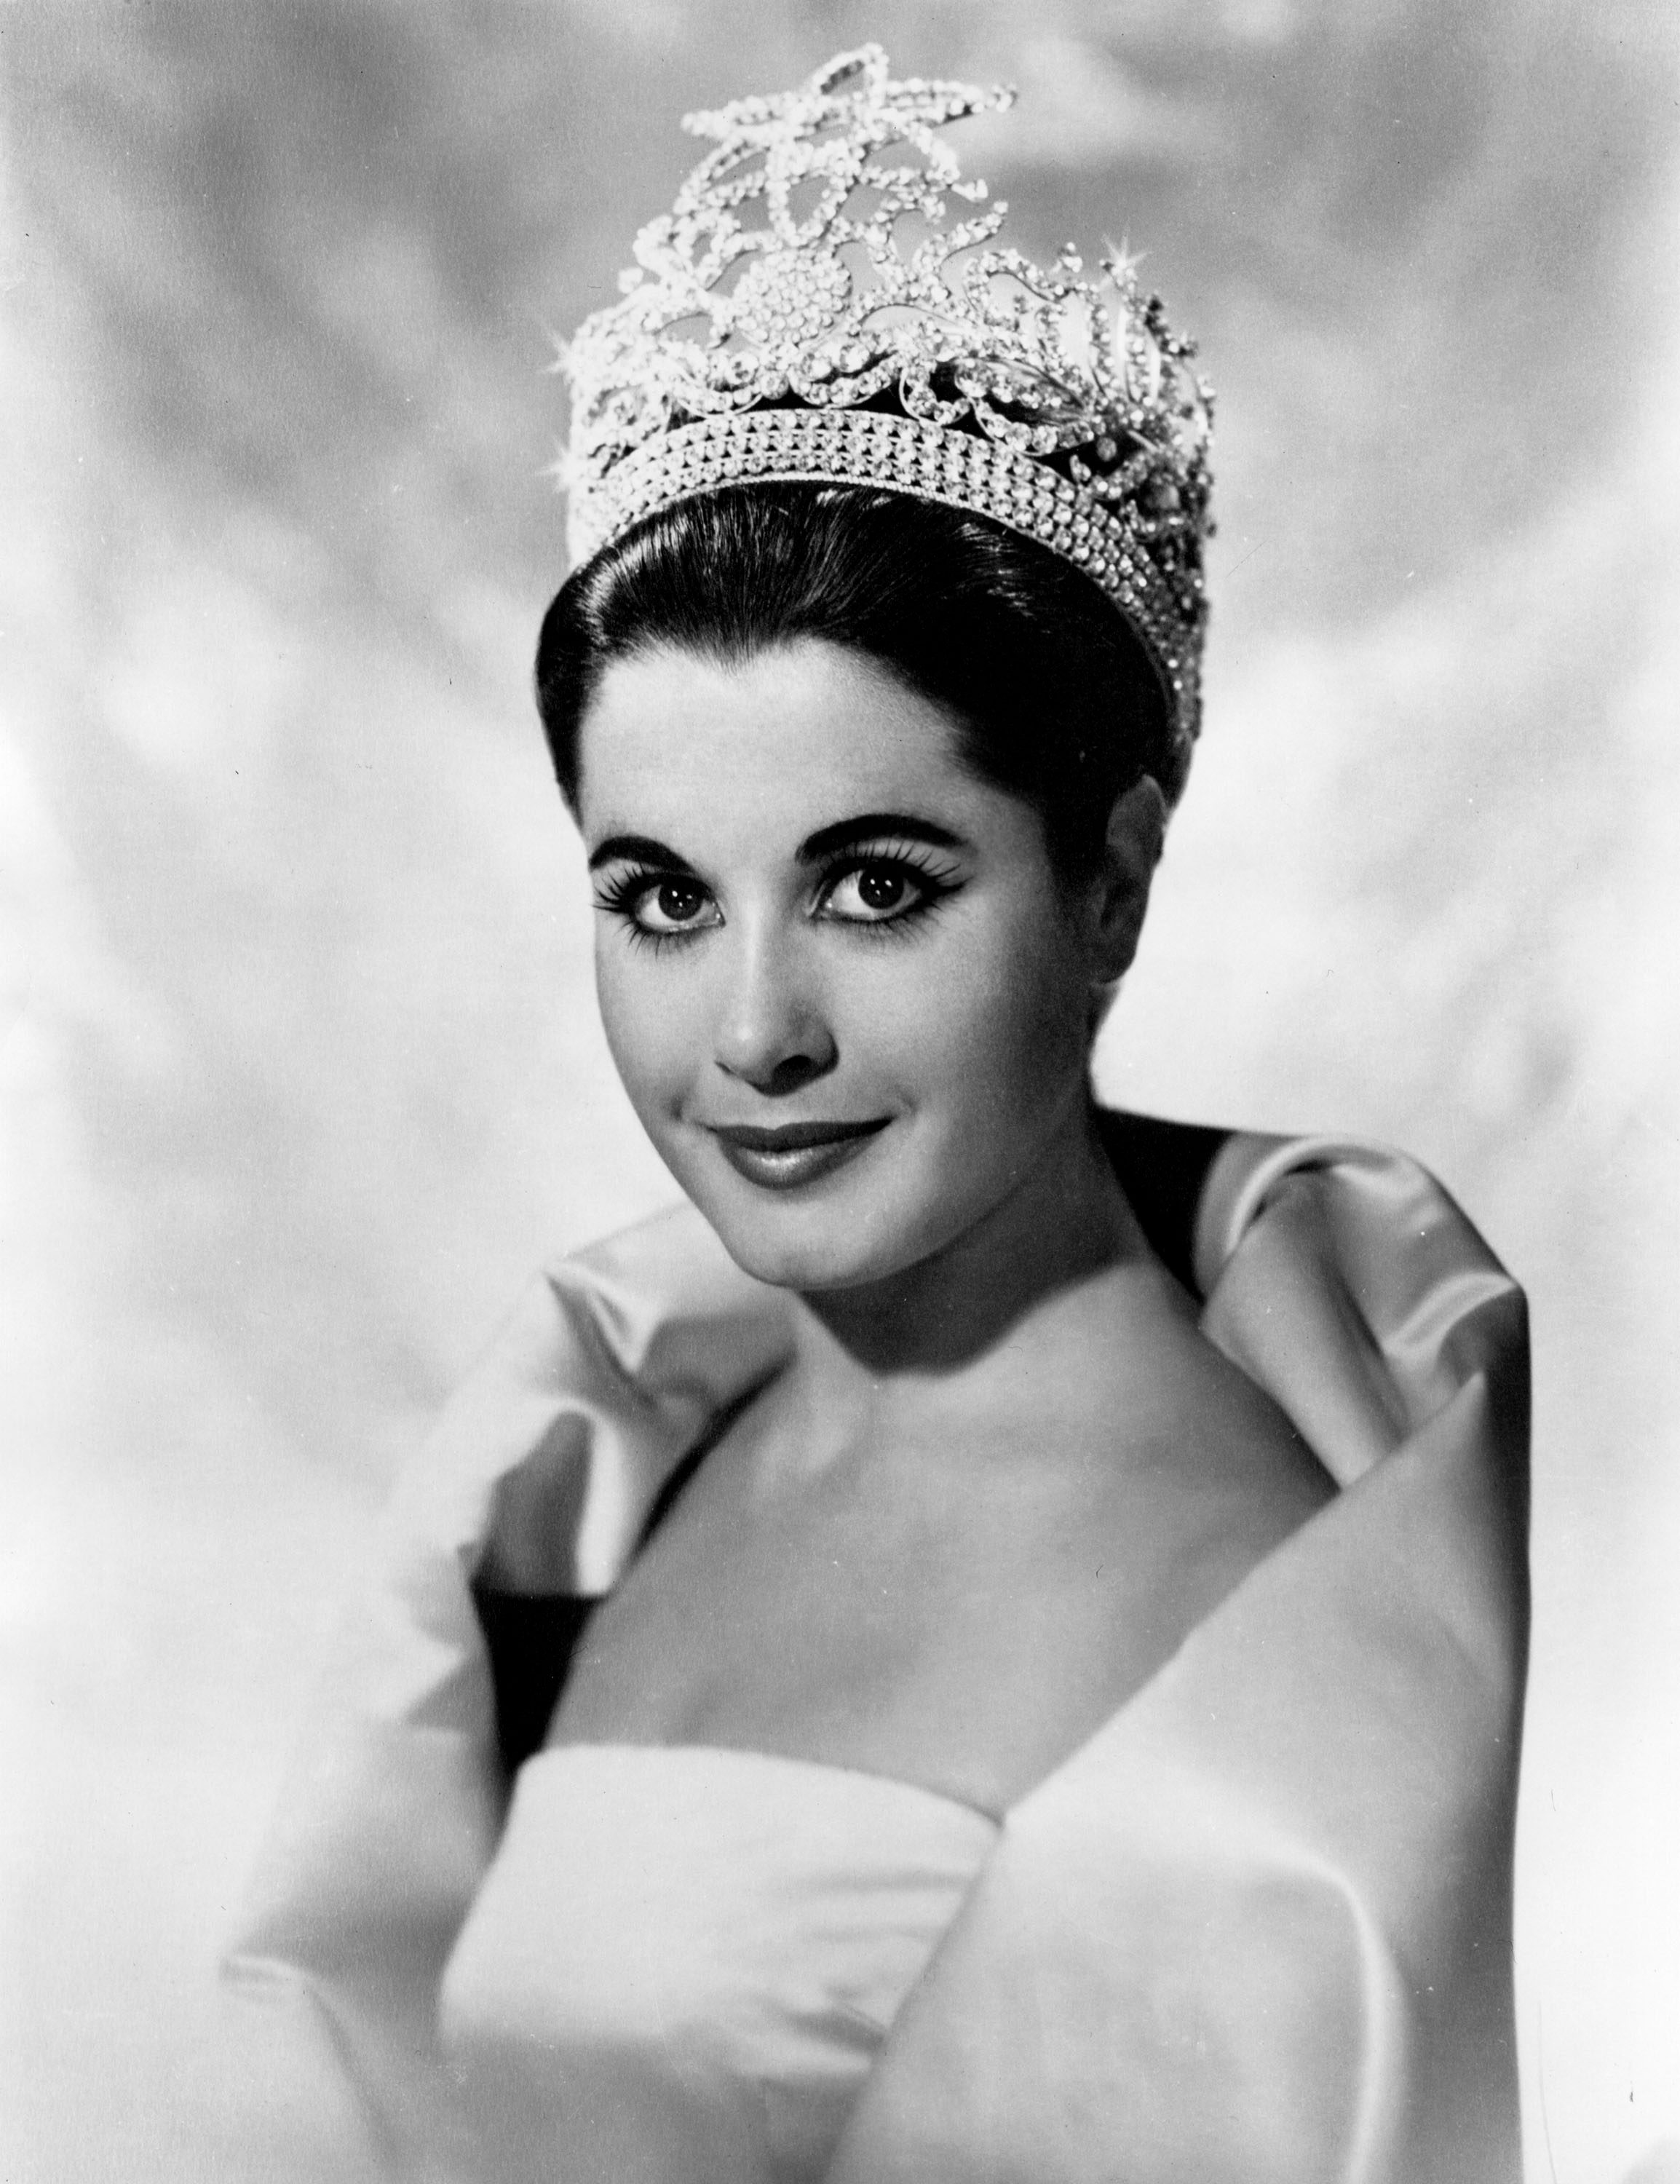 MISS UNIVERSE 1962. Argentina's Norma Nolan poses for an official photo. Each Miss Universe will be featured in thousands of photos during her reign and will sign just as many autographs. Photo from Miss Universe Organization 